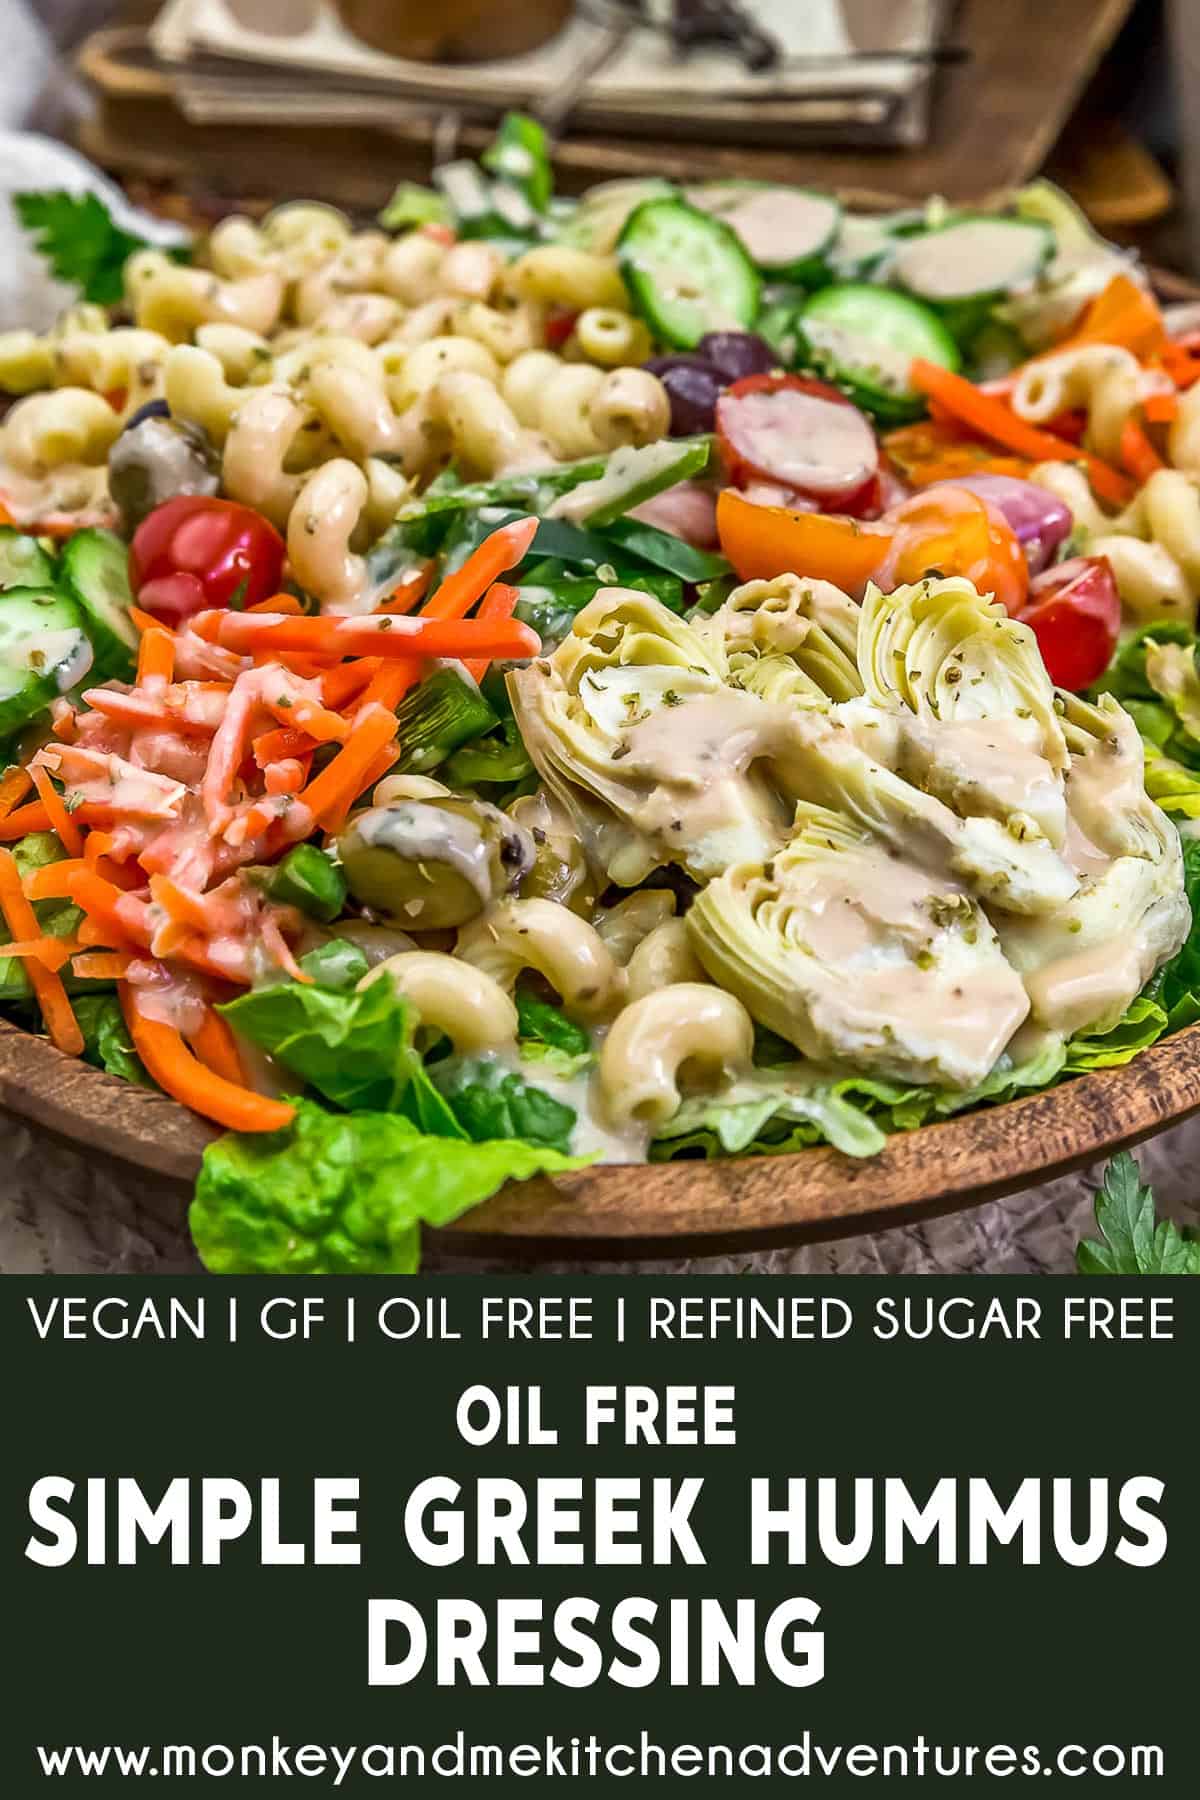 Oil Free Simple Greek Hummus Dressing with text description